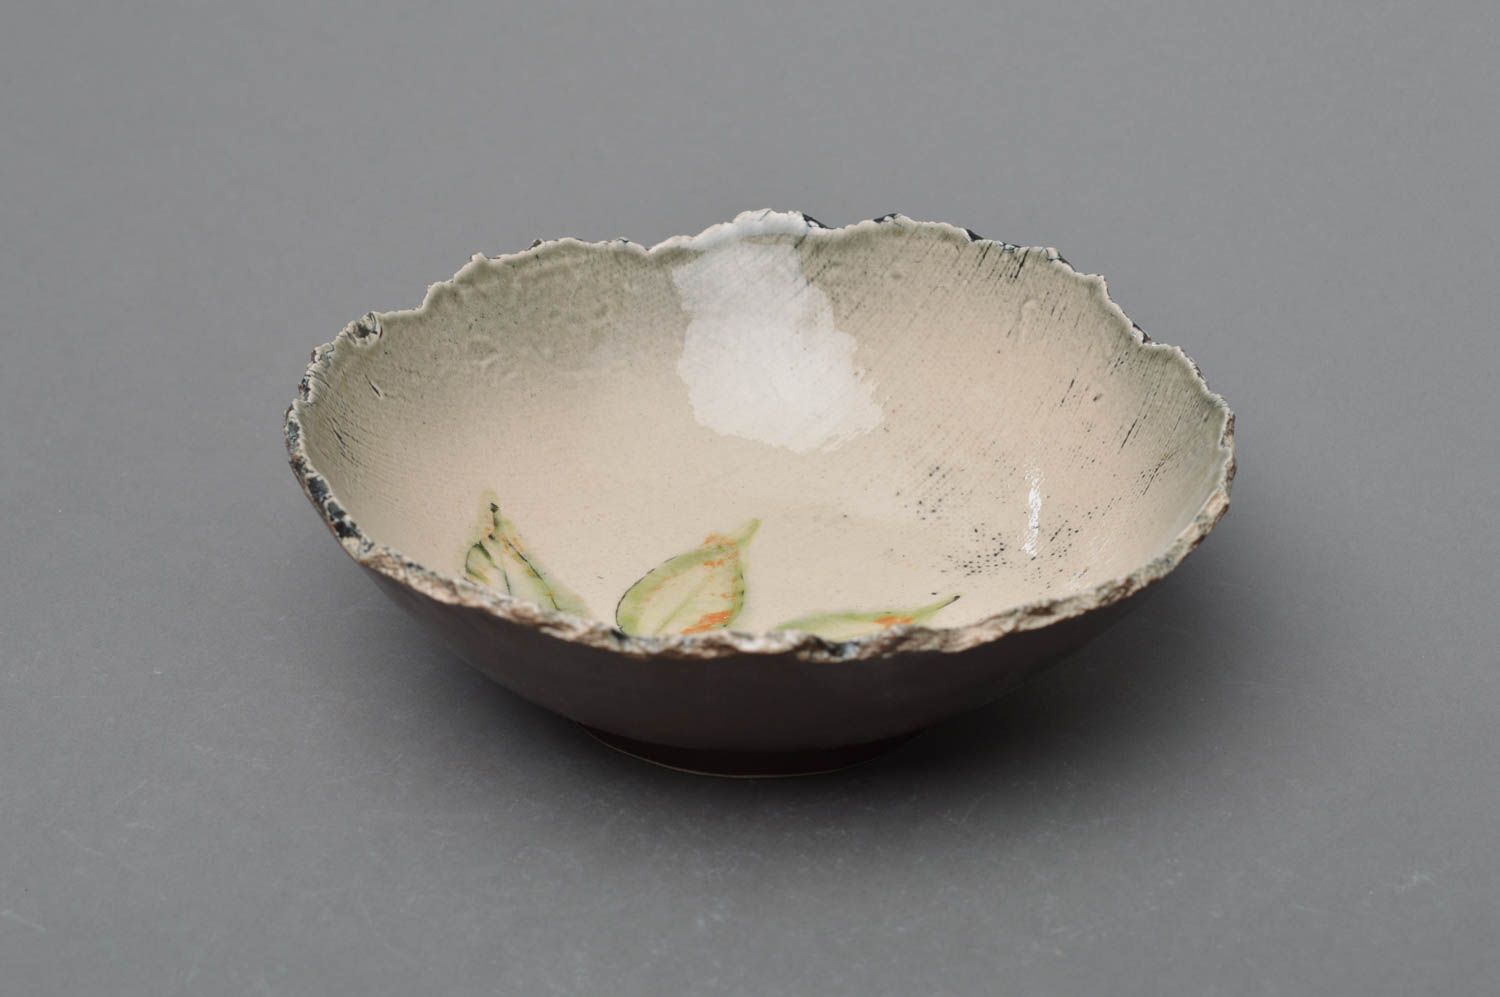 Handmade small designer porcelain bowl painted with glaze with leaves image photo 1